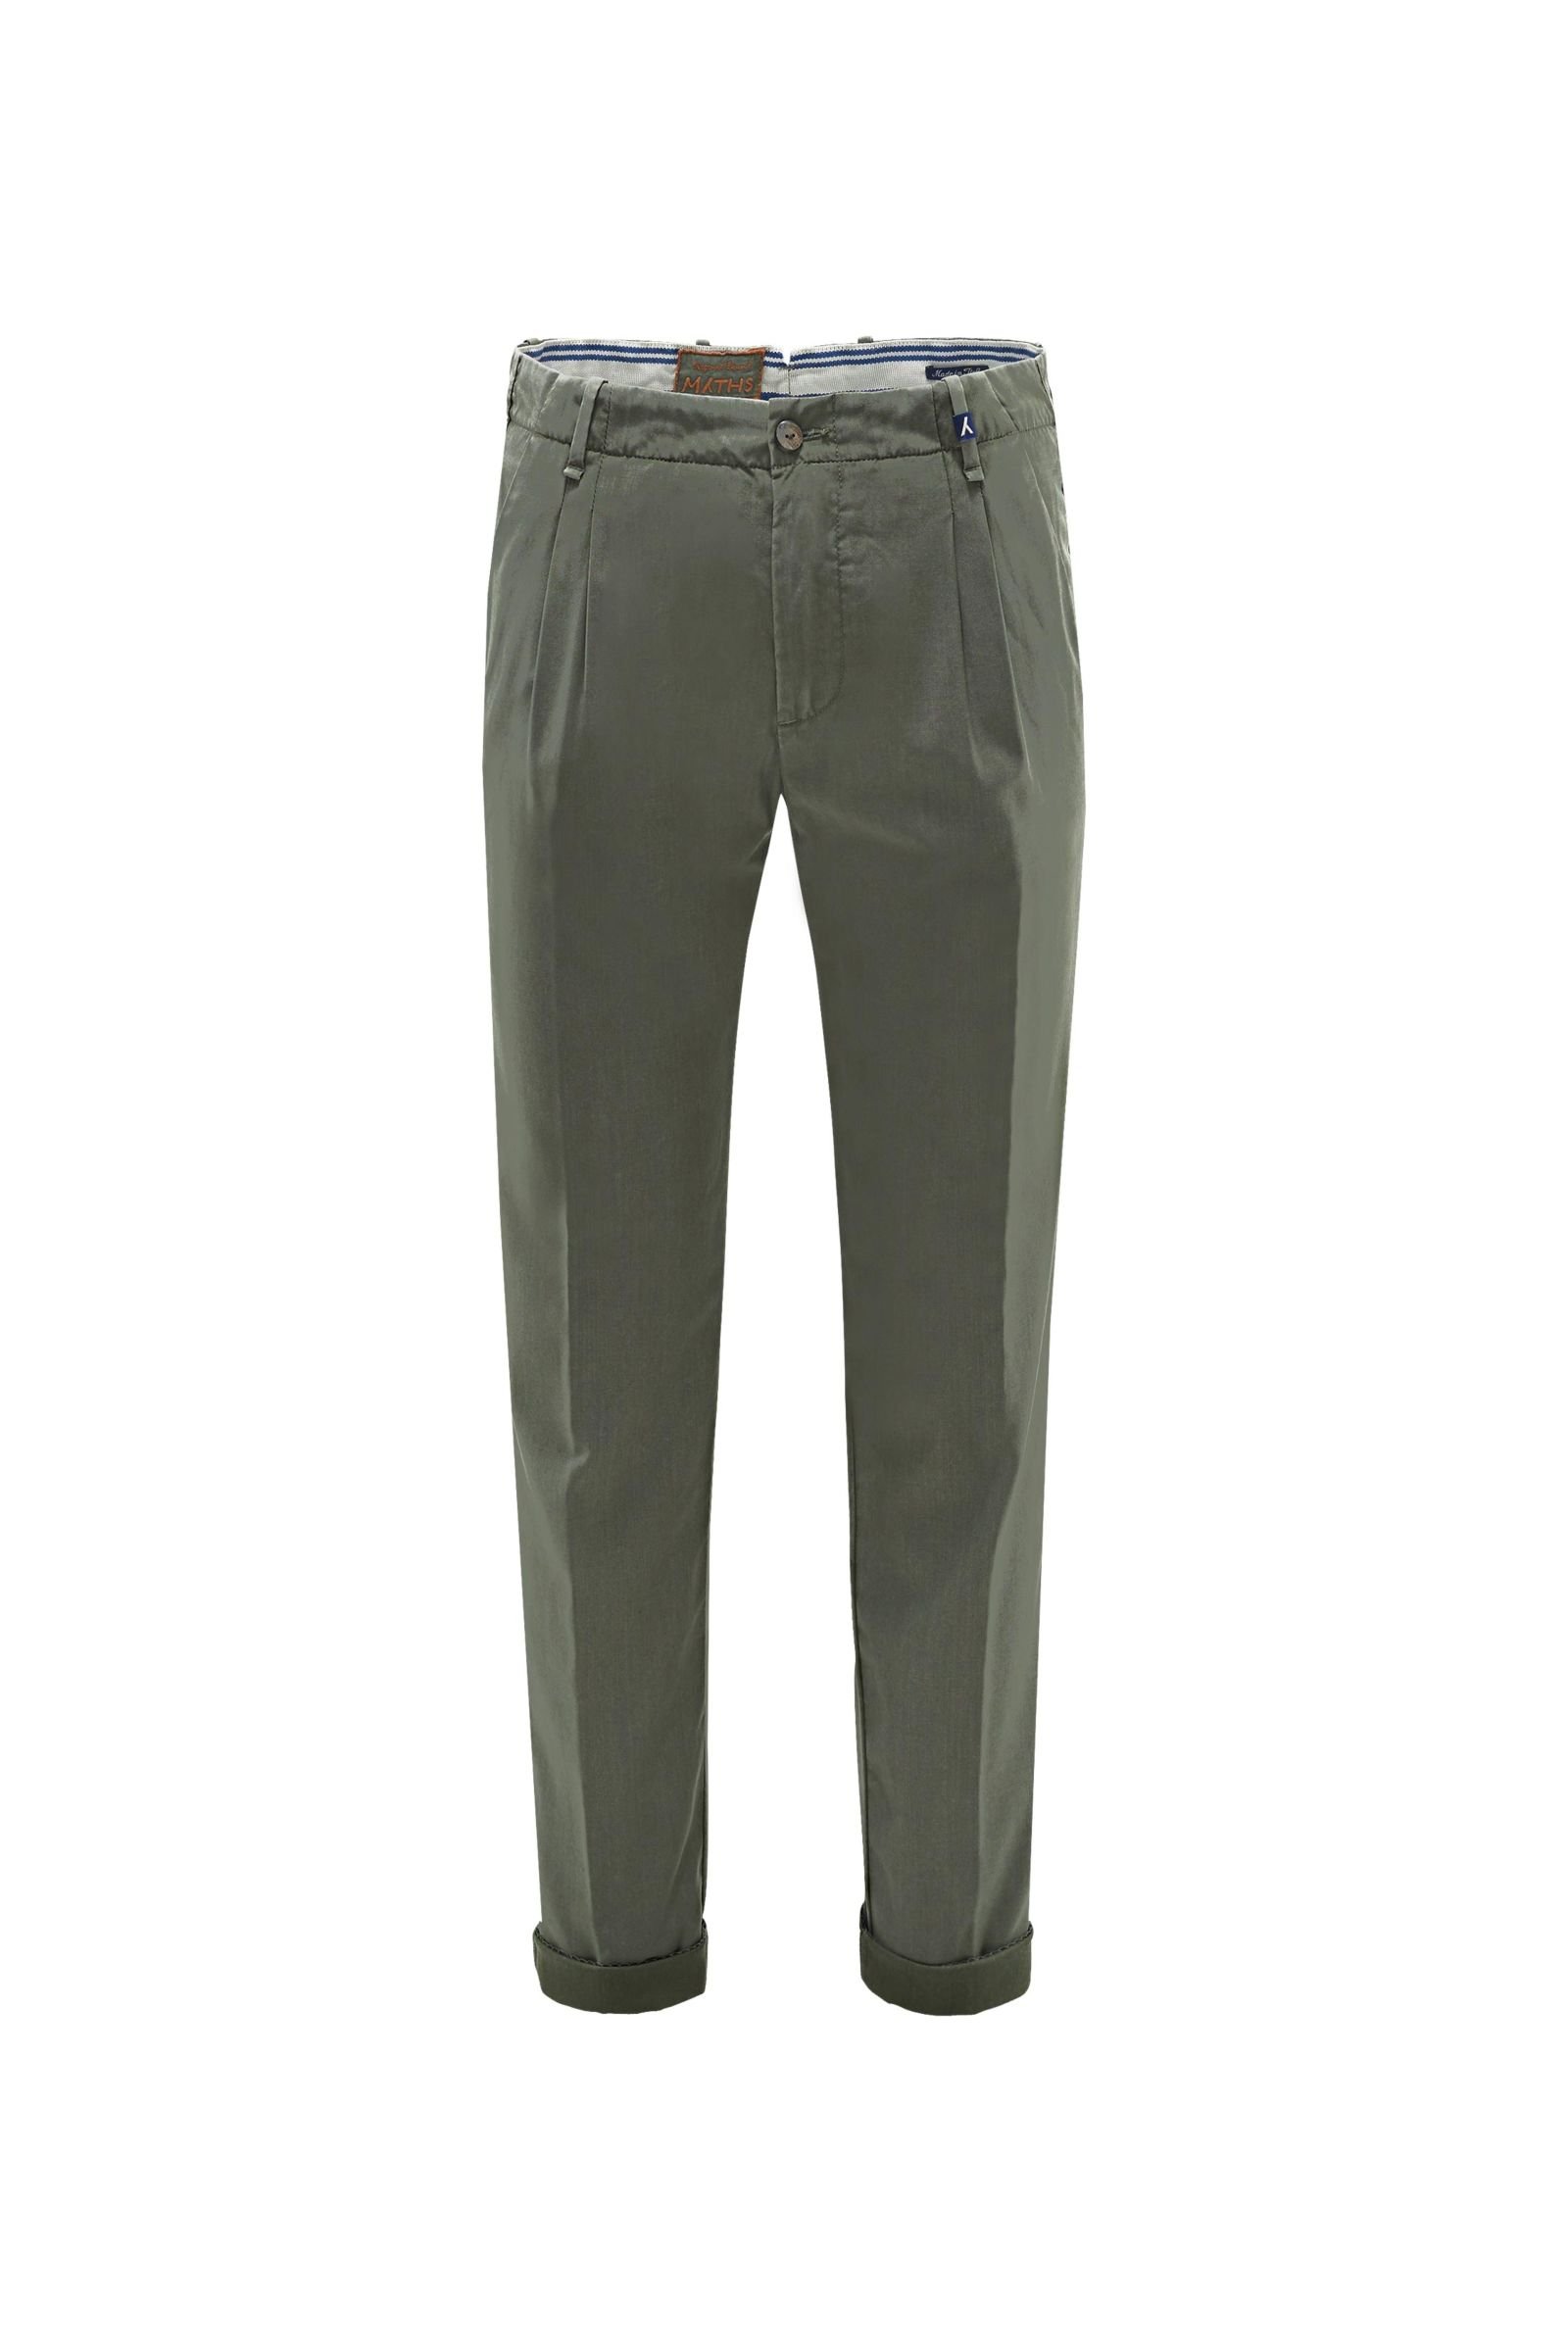 Wool trousers olive